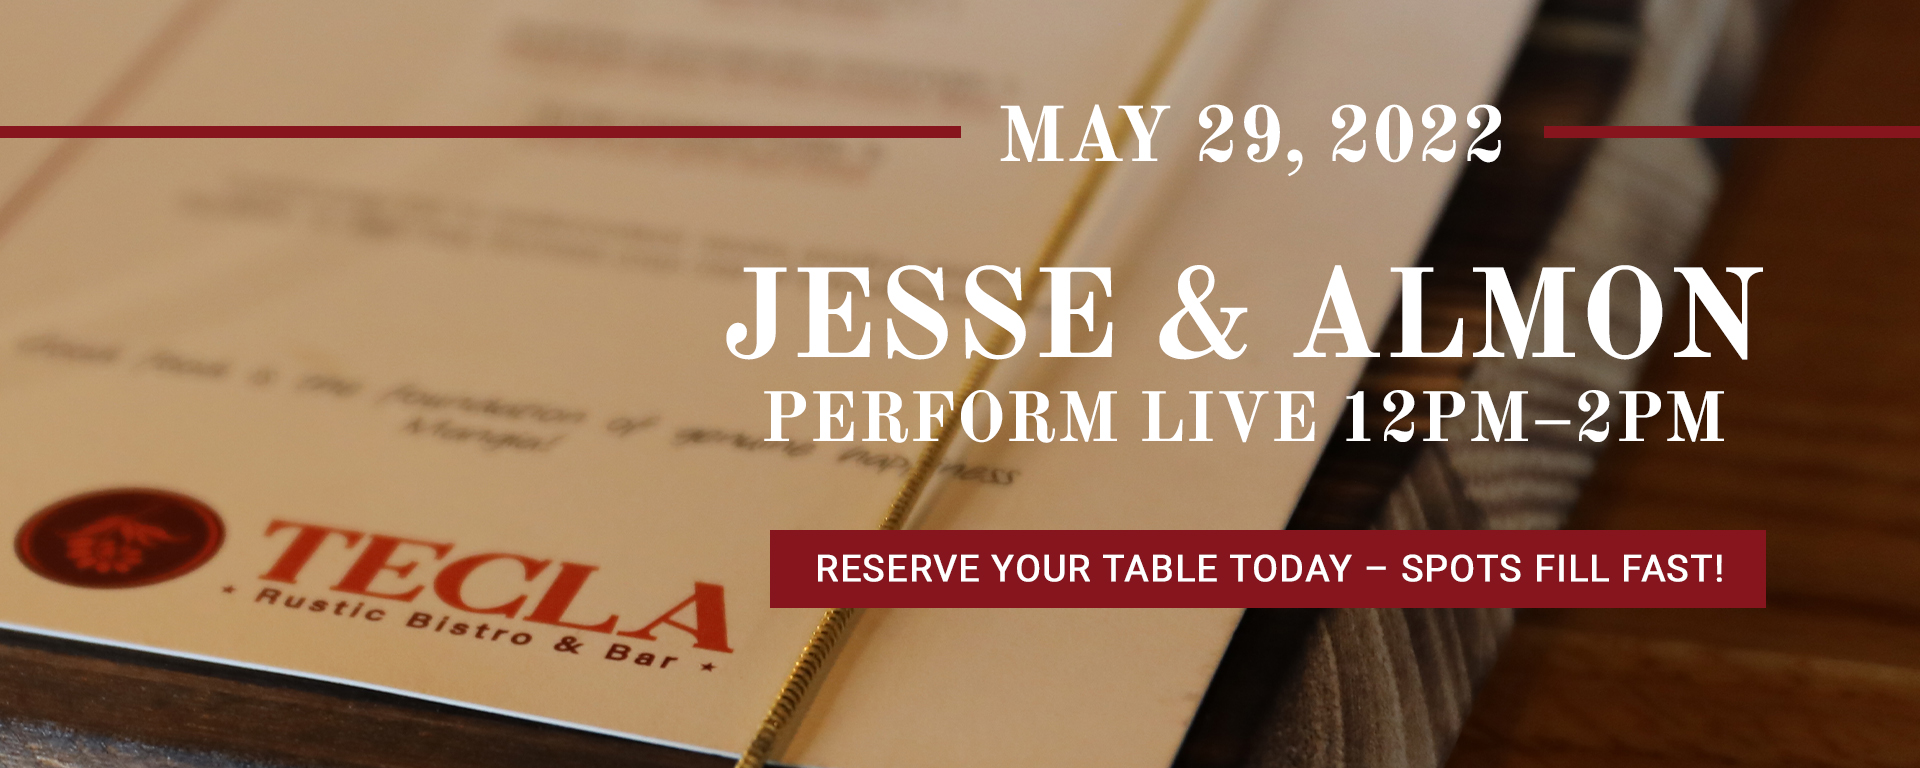 05/29/22 LIVE MUSIC FEATURING JESSE & ALMON